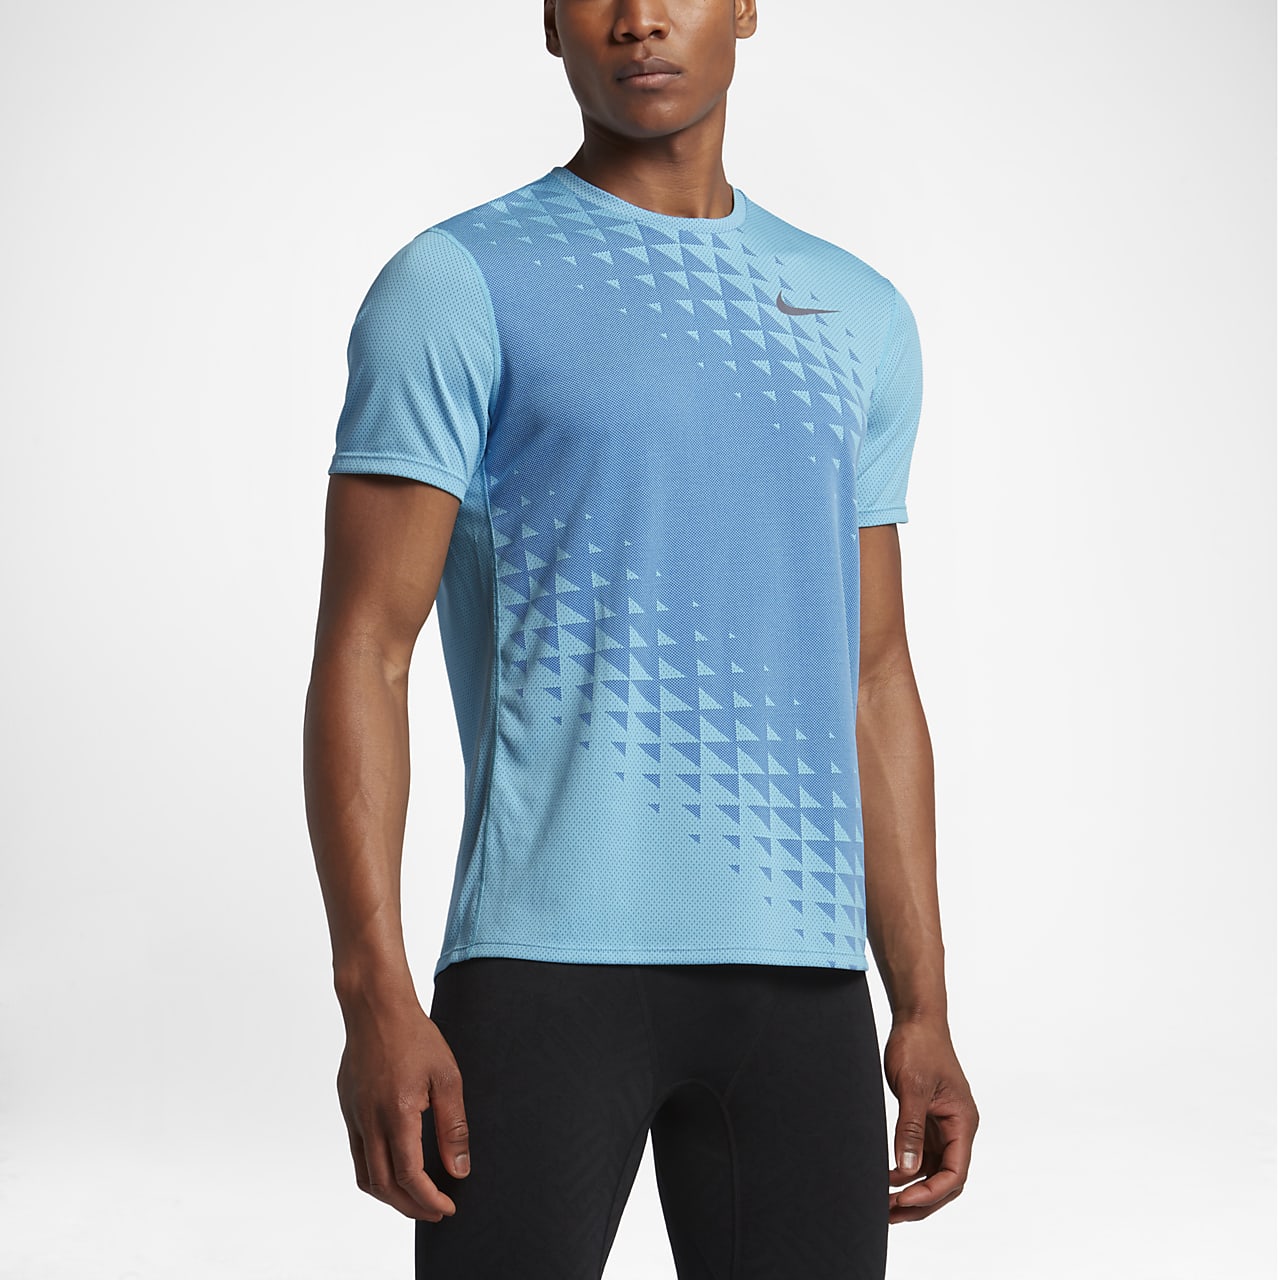 Nike Zonal Cooling Relay Graphic Men's Short-Sleeve Running Top